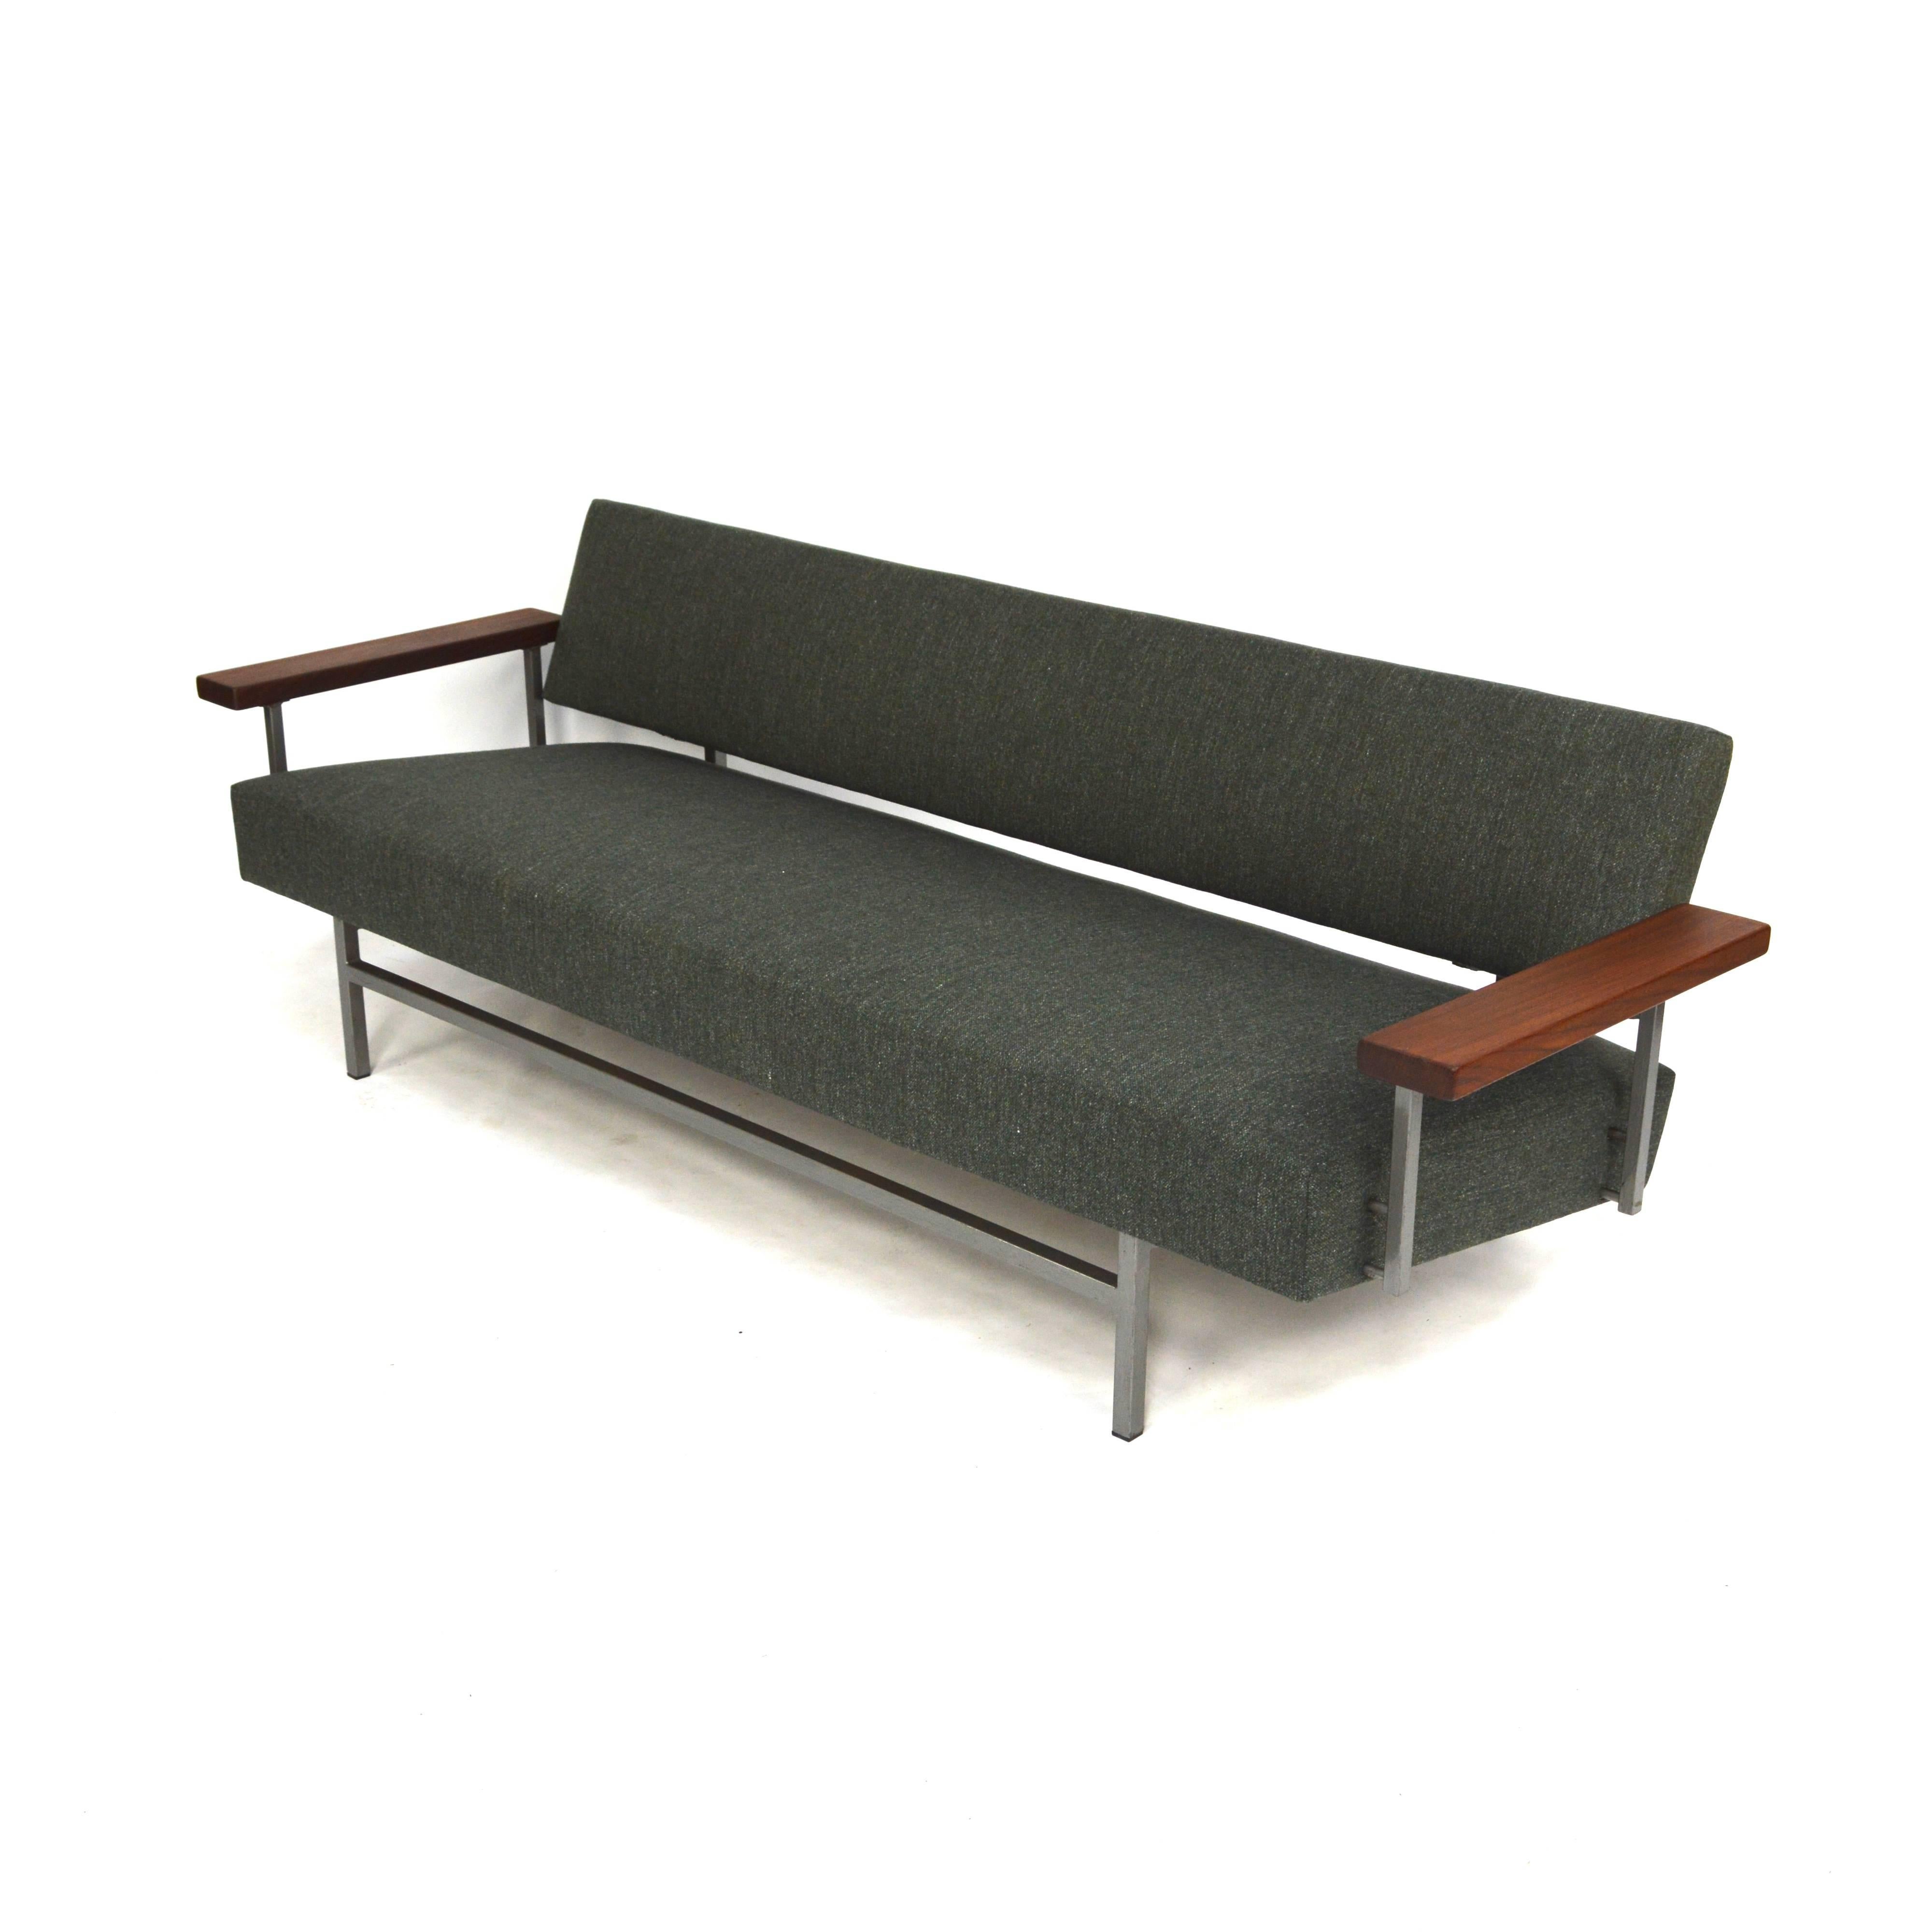 Dutch Daybed Sofa by Rob Parry for Gelderland, 1950s